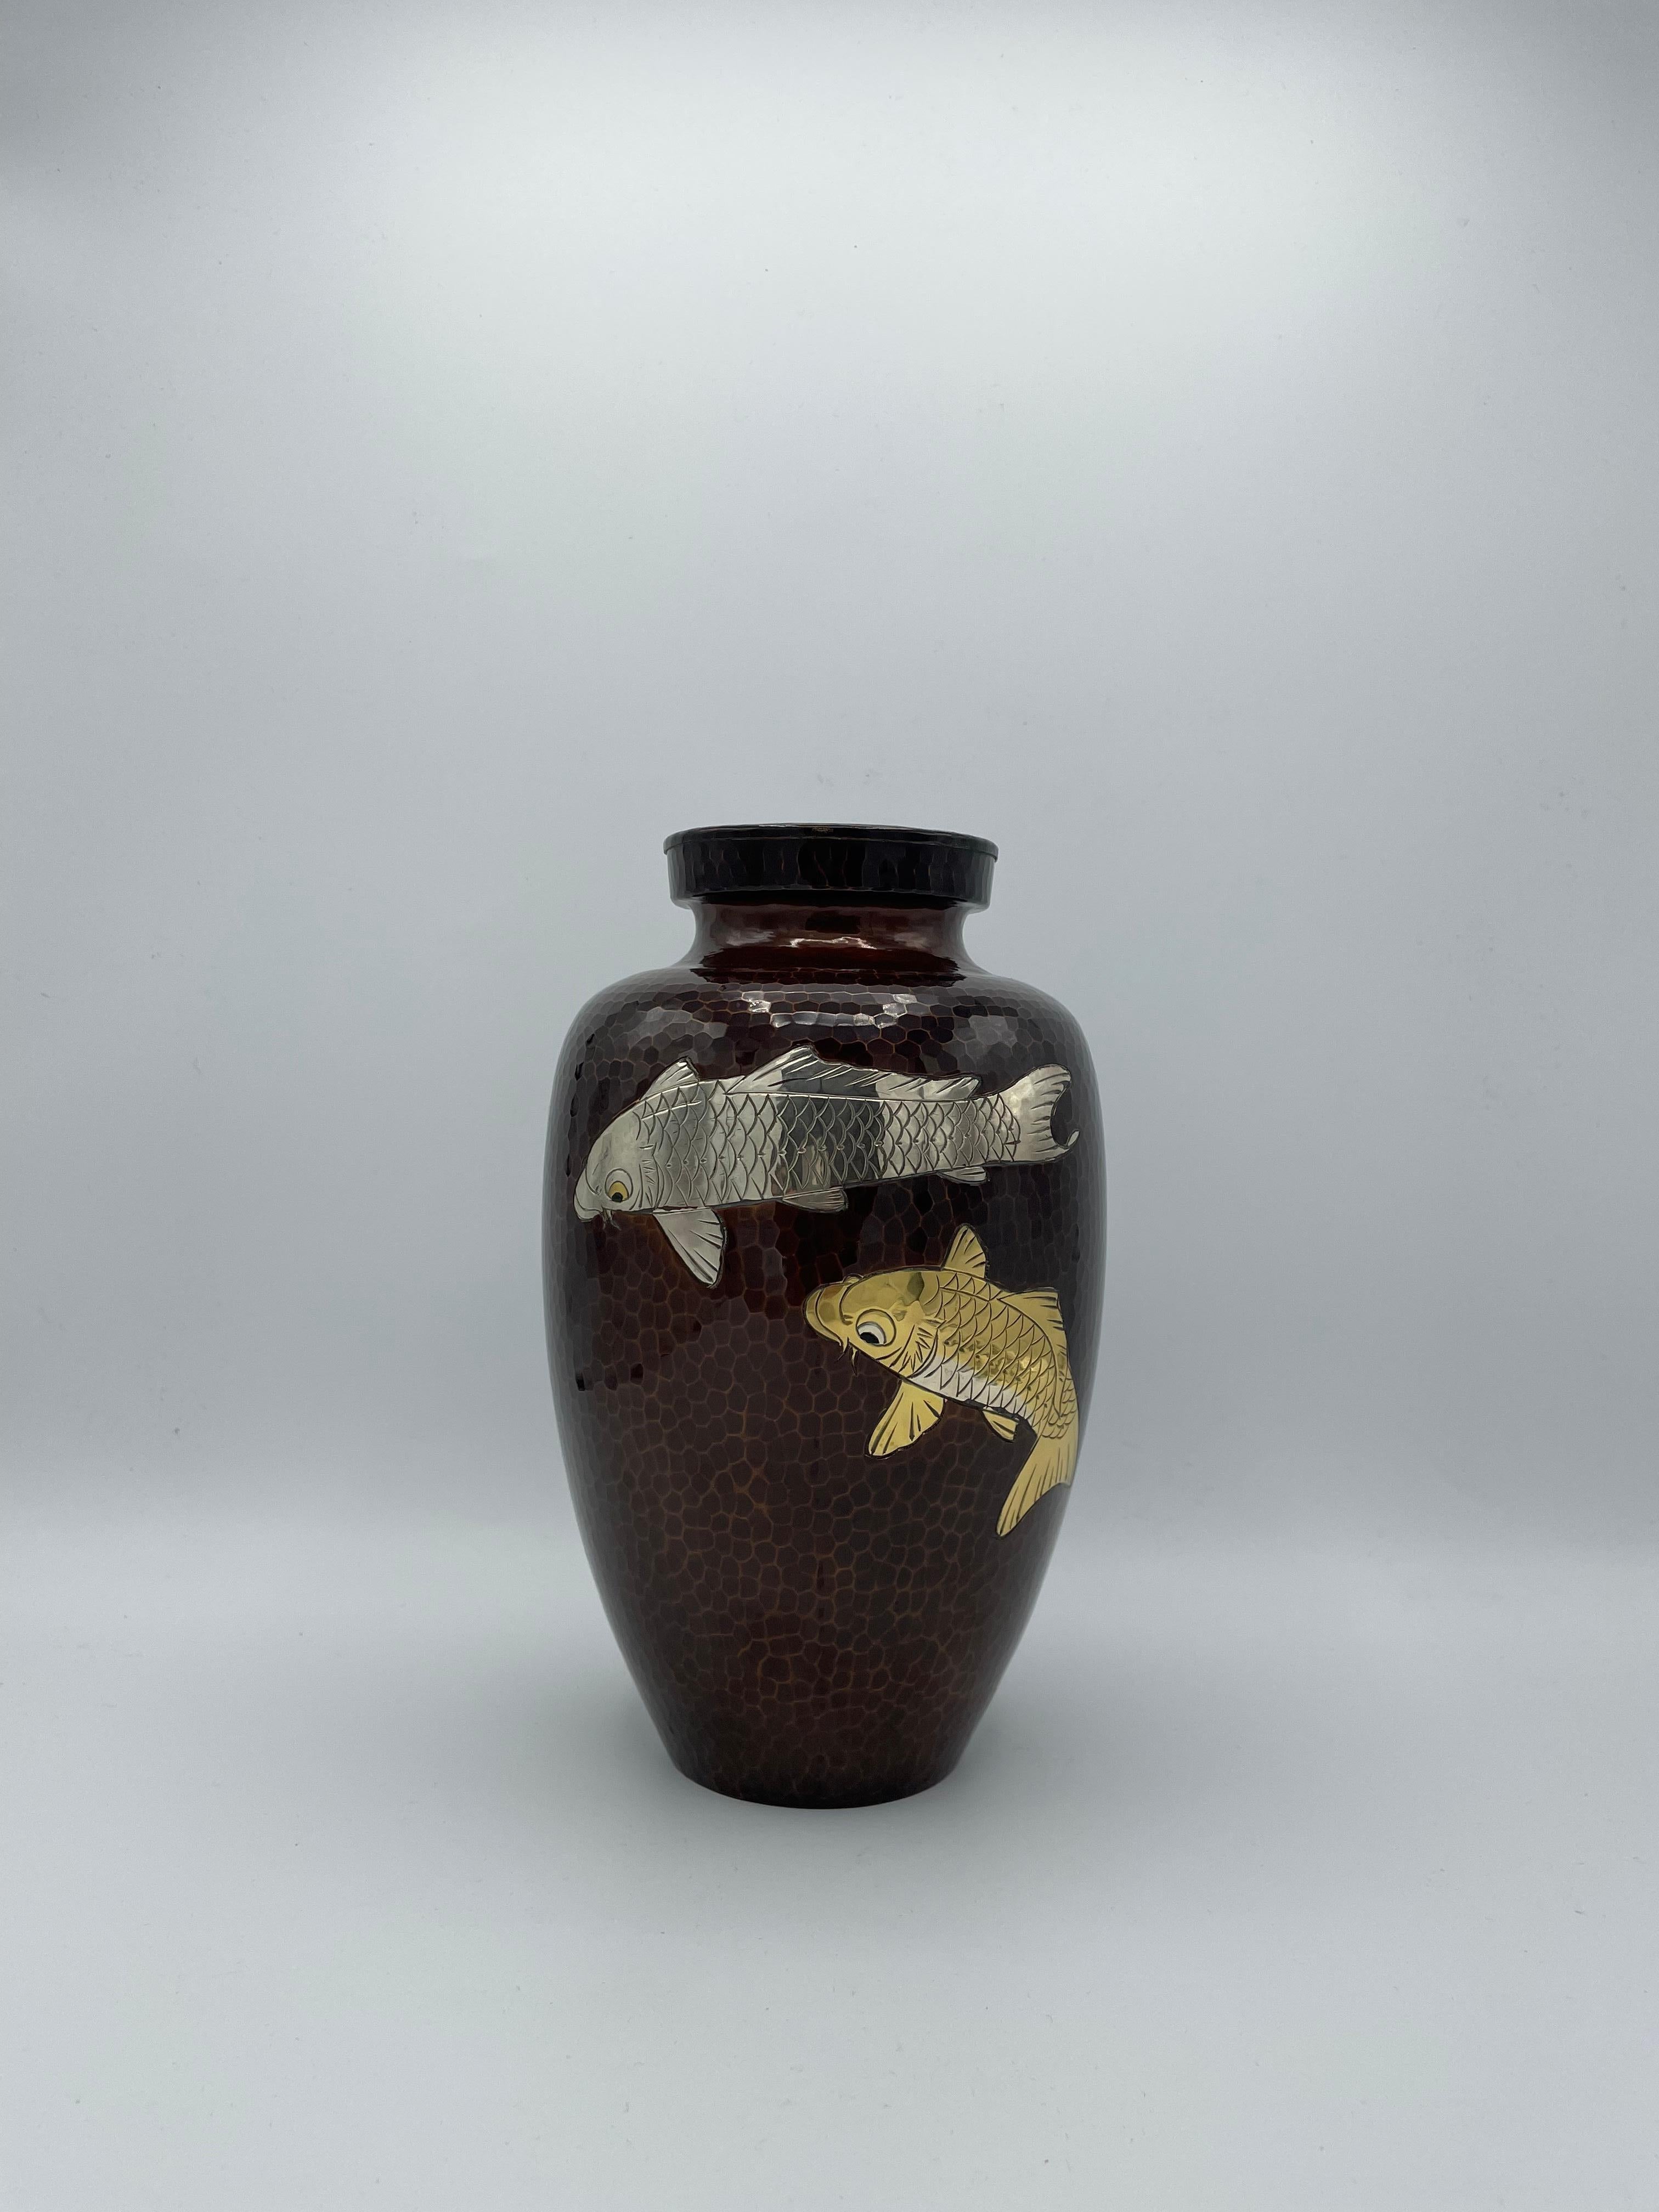 This is a flower vase made in Japan around 1980 in Showa era. It is designed with two carps in gold and silver. 
This style made with copper is called Shippou in Japanese.
The cloisonné technique was mastered in China in the early 19th century and